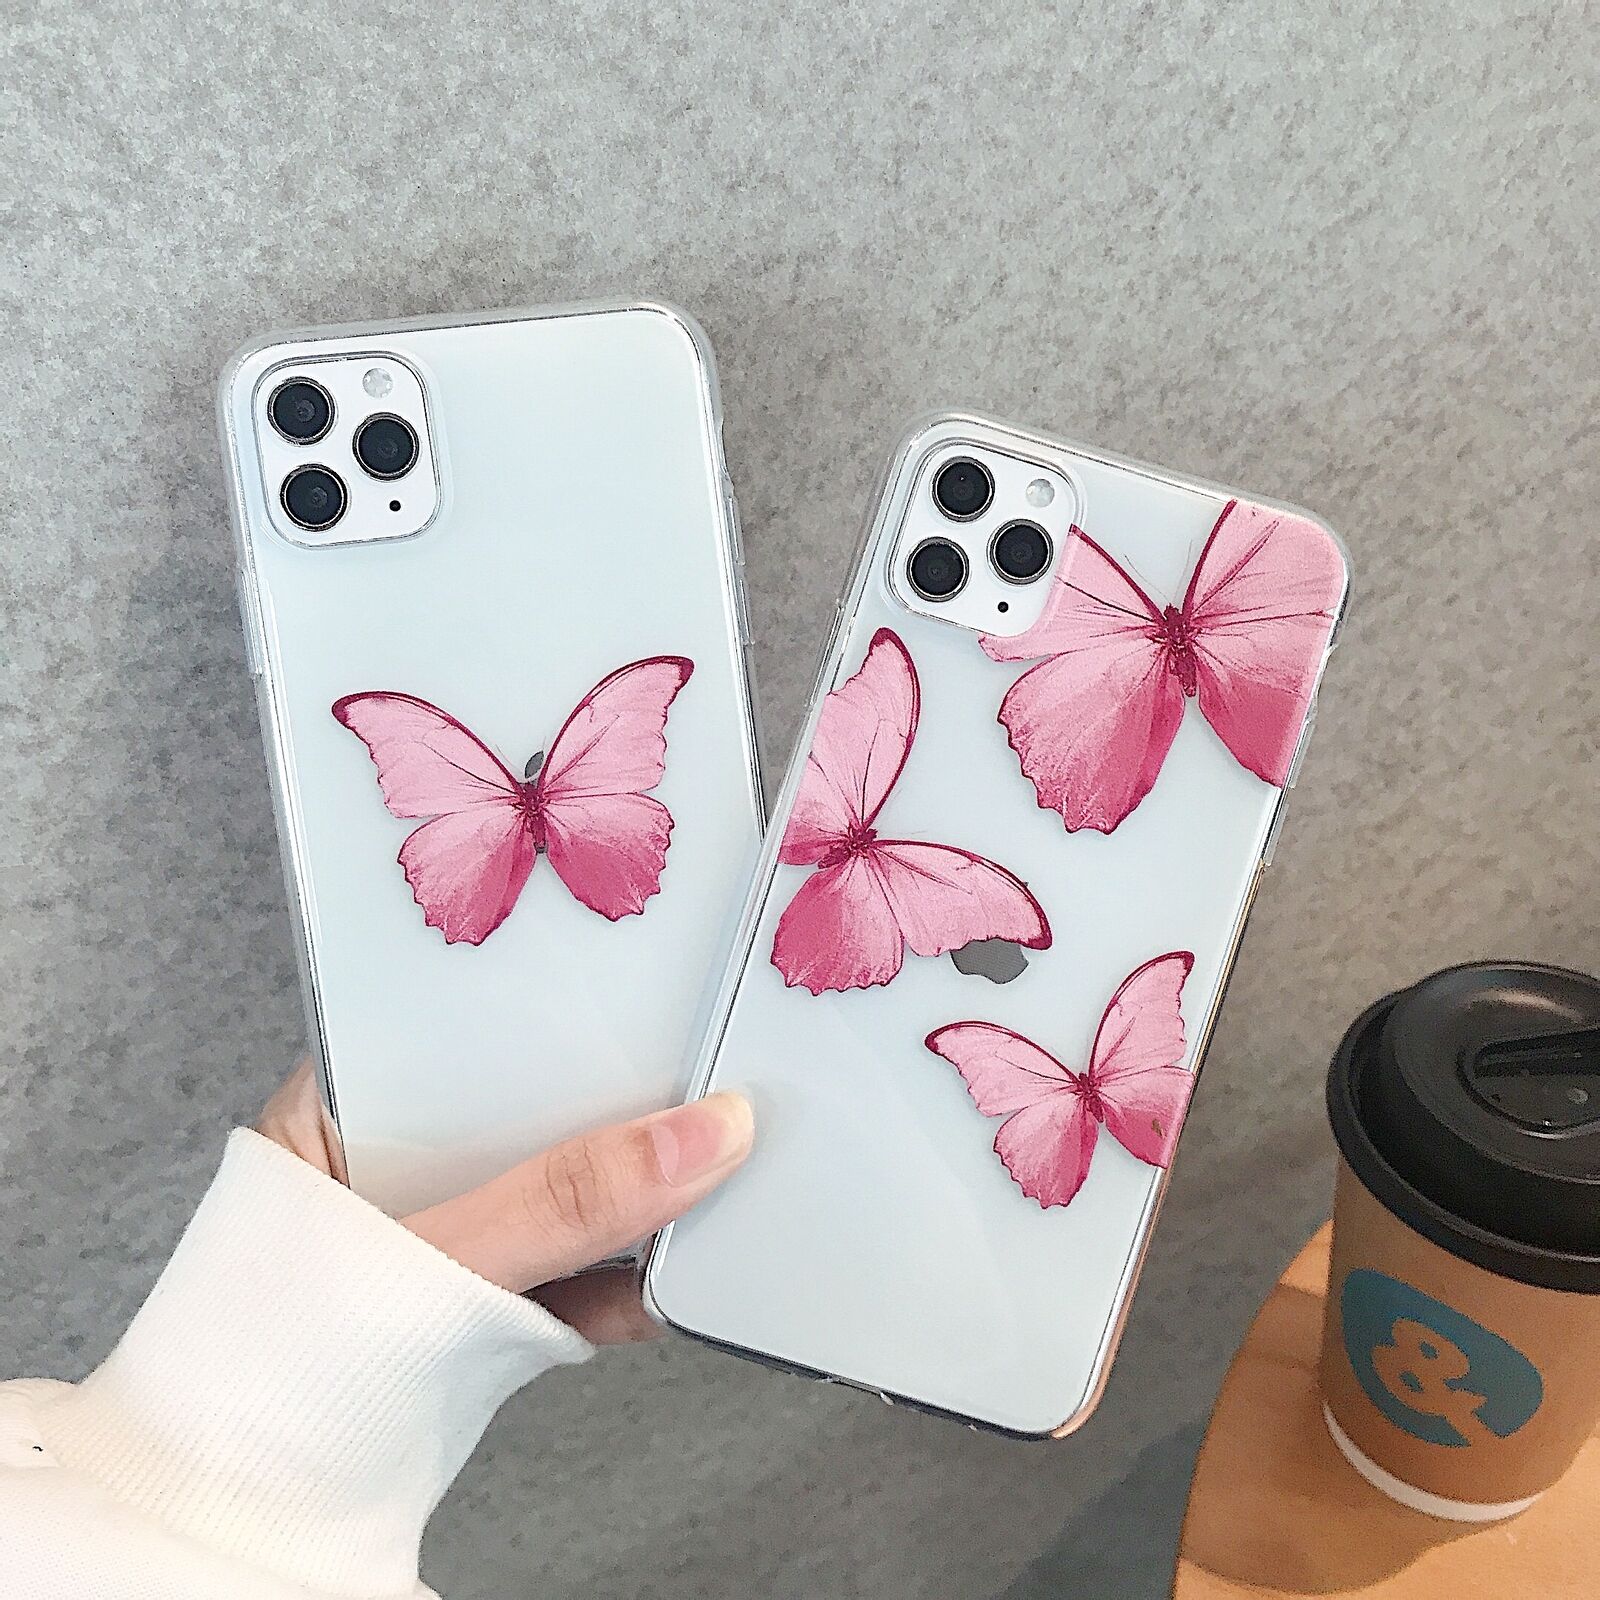 Butterfly Pattern Soft Rubber Back Case For iPhone